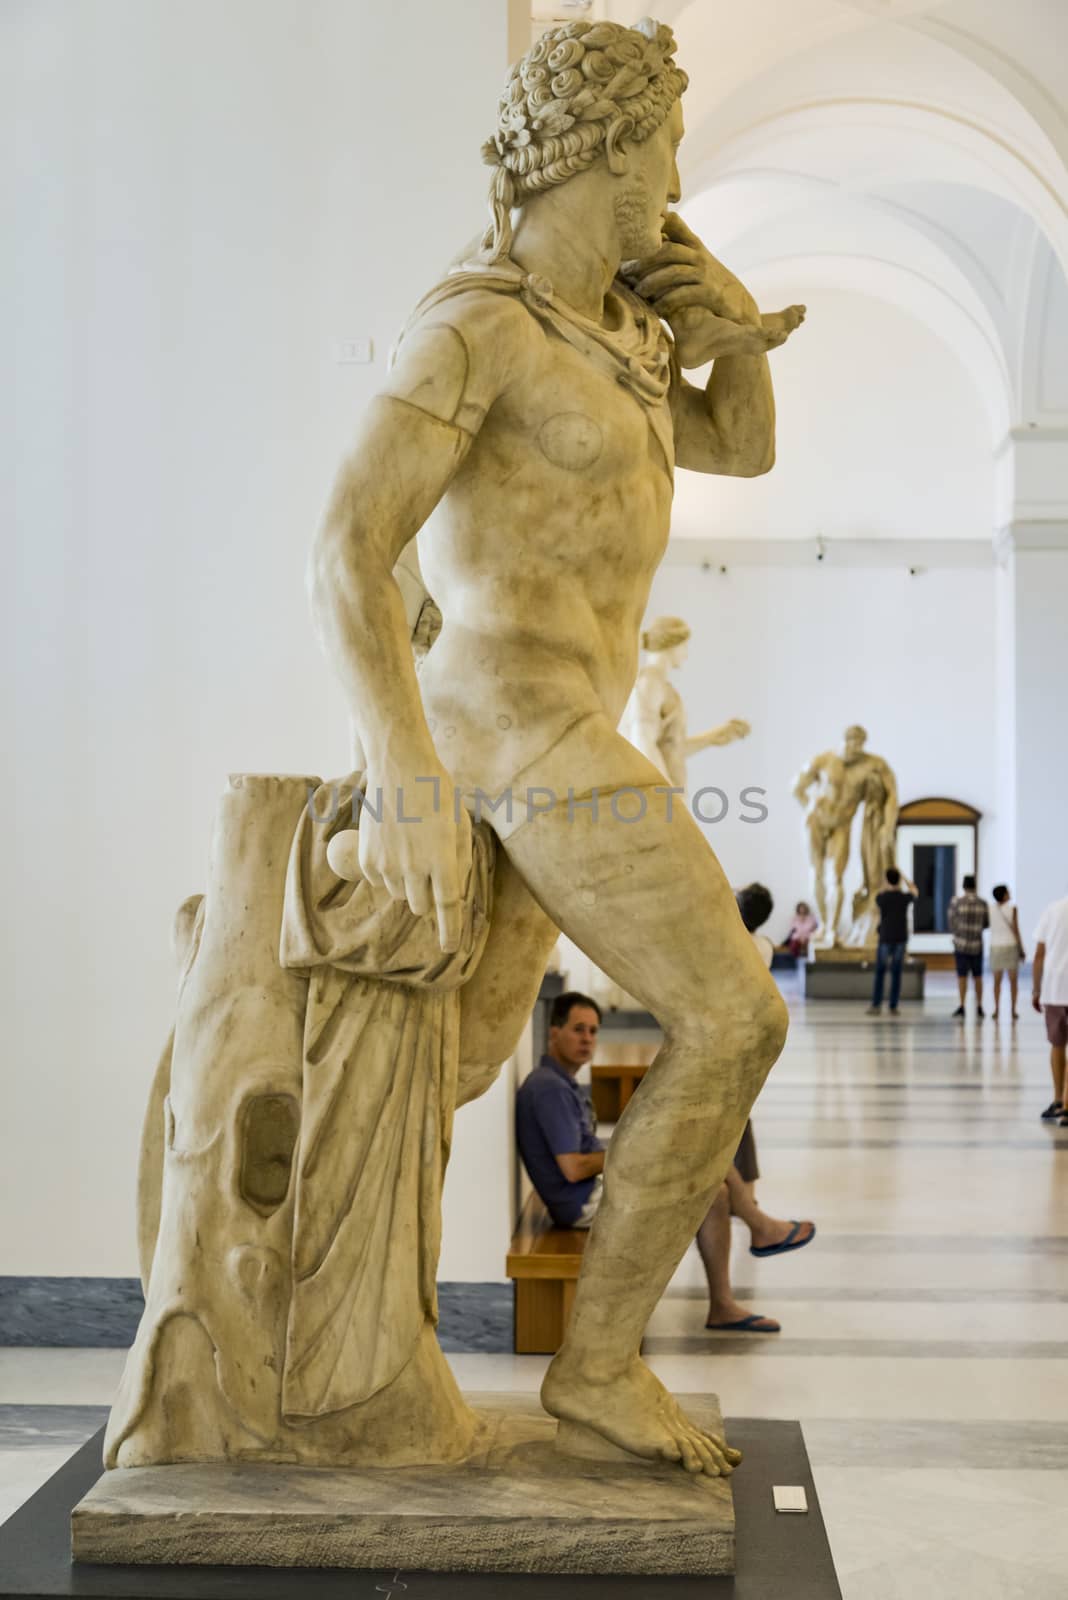 NAPLES, SEPTEMBER 04: statue in Naples National Archaeological Museum. The museum contains a large collection of Roman artifacts from Pompeii, Stabiae and Herculaneum. On September 4, 2016 in Naples, Italy